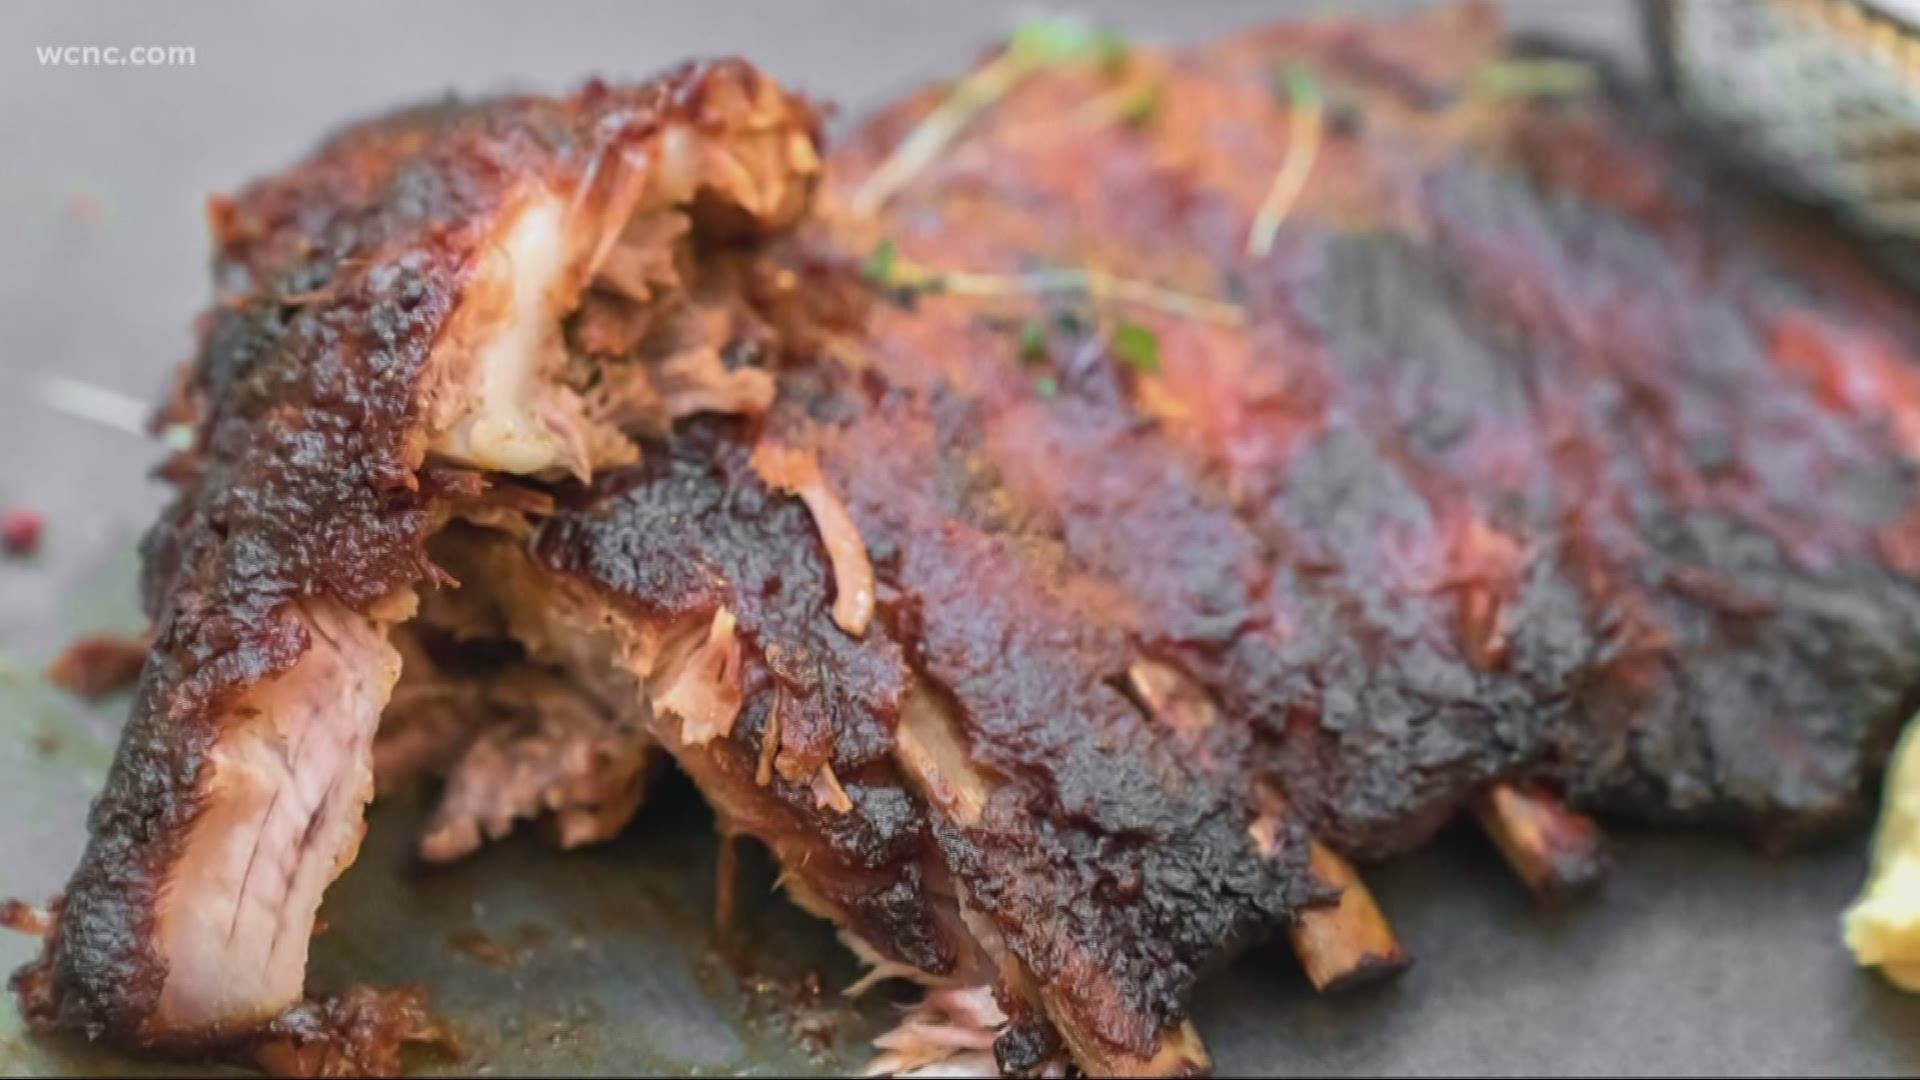 Think you're the ultimate foodie? Reynolds Wrap is offering to pay you $10,000 to taste test ribs across America and posting photos on social media.